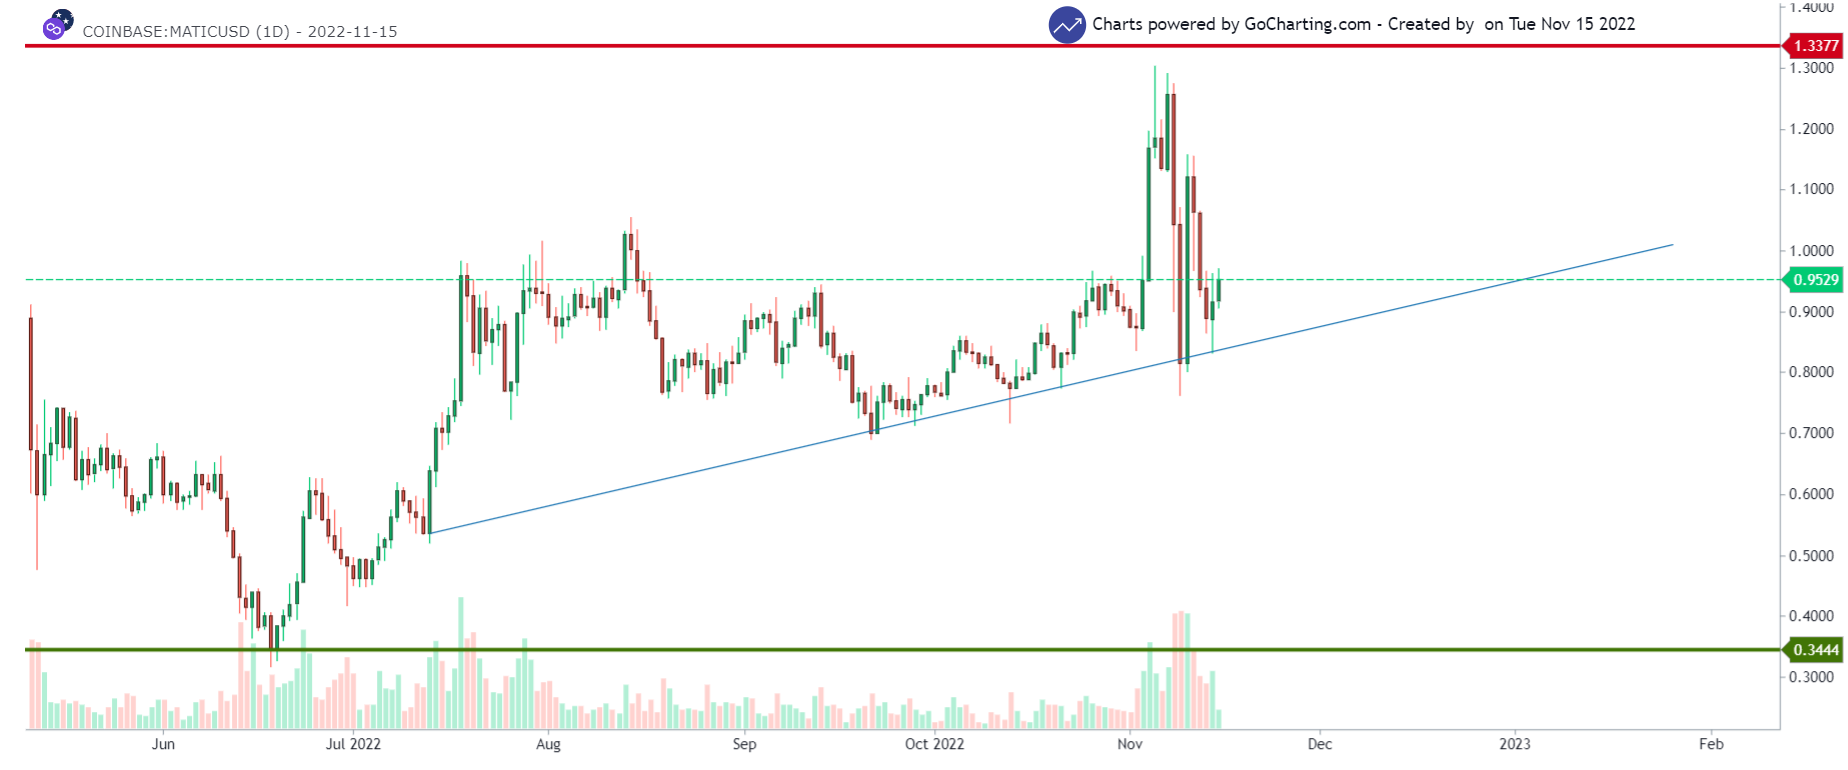 Matic price prediction: MATIC/USD 1-day chart showing the uptrend of MATIC